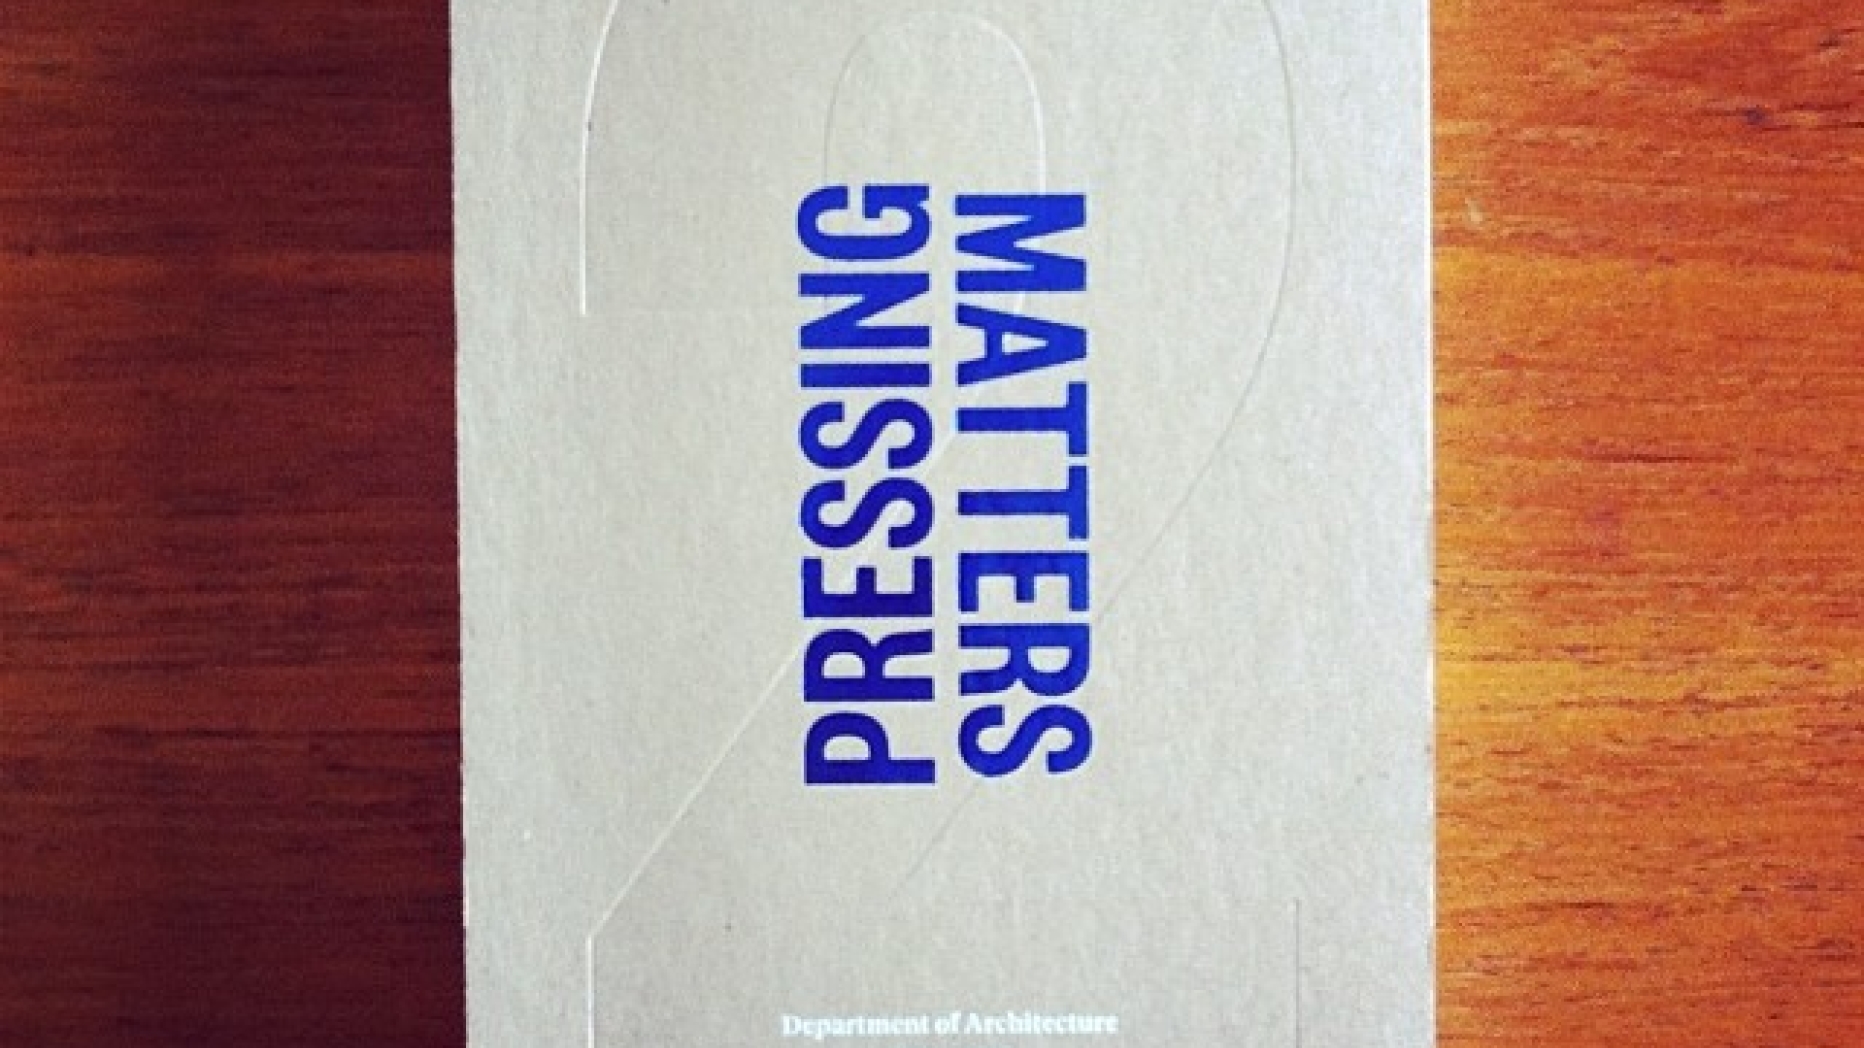 Copy of book, "Pressing Matters 2" sitting on wooden table.